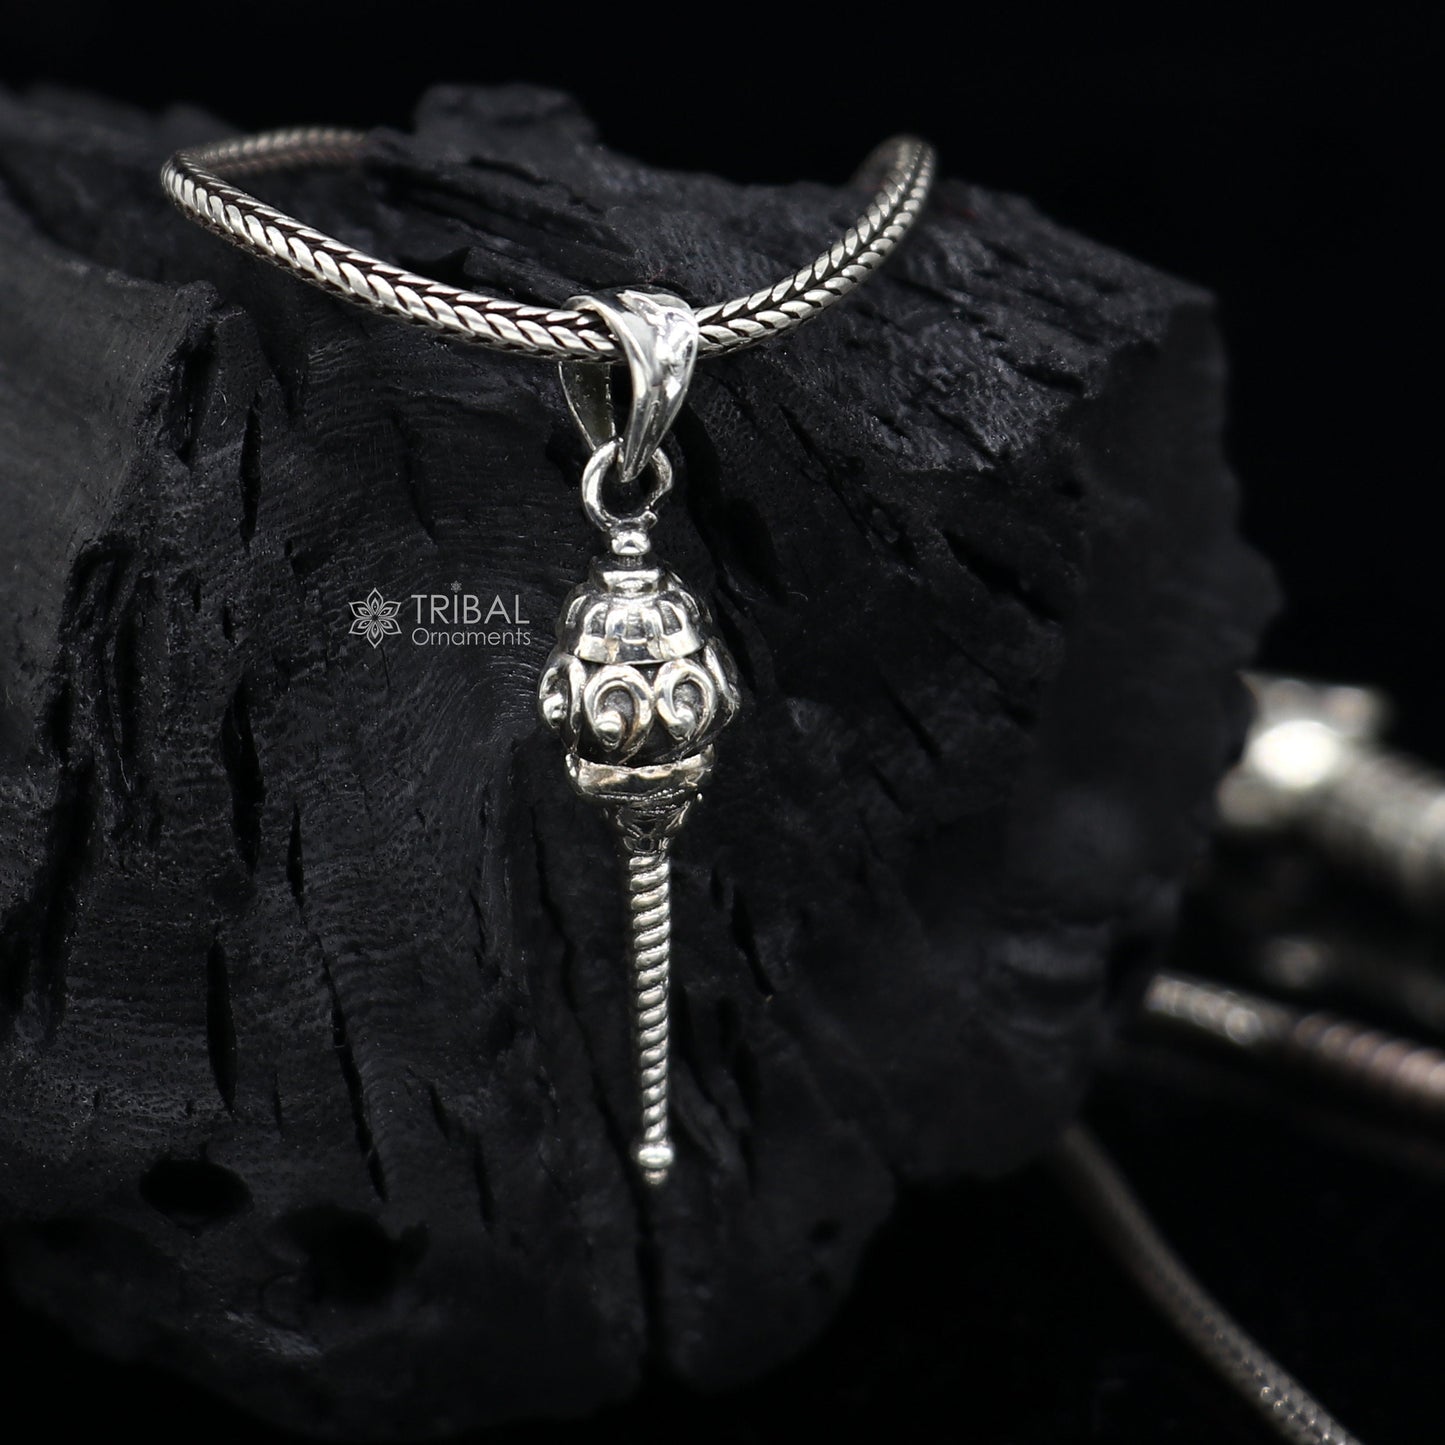 Unique Lord hanuman mace/gada 925 sterling silver small pendant, Wonderful Pendant for unisex gifting  necklace nsp666 - TRIBAL ORNAMENTS